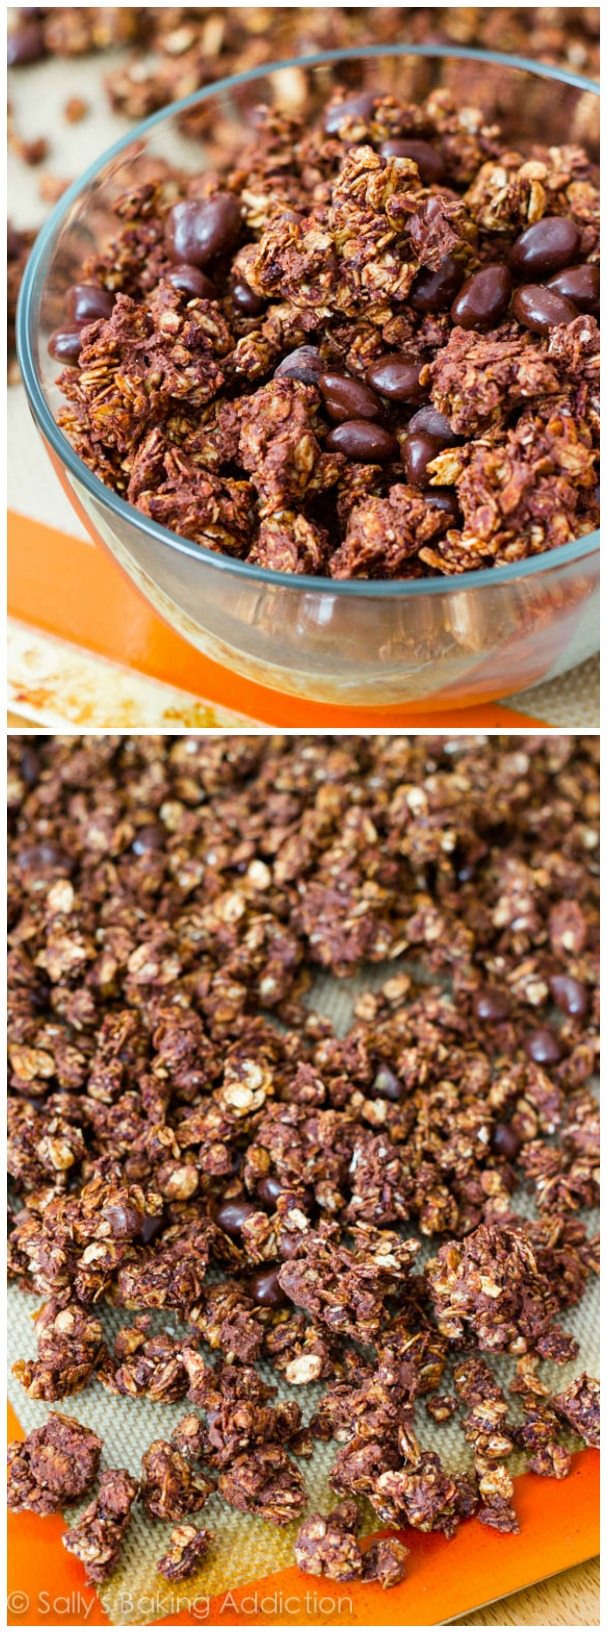 2 images of triple chocolate crunch granola